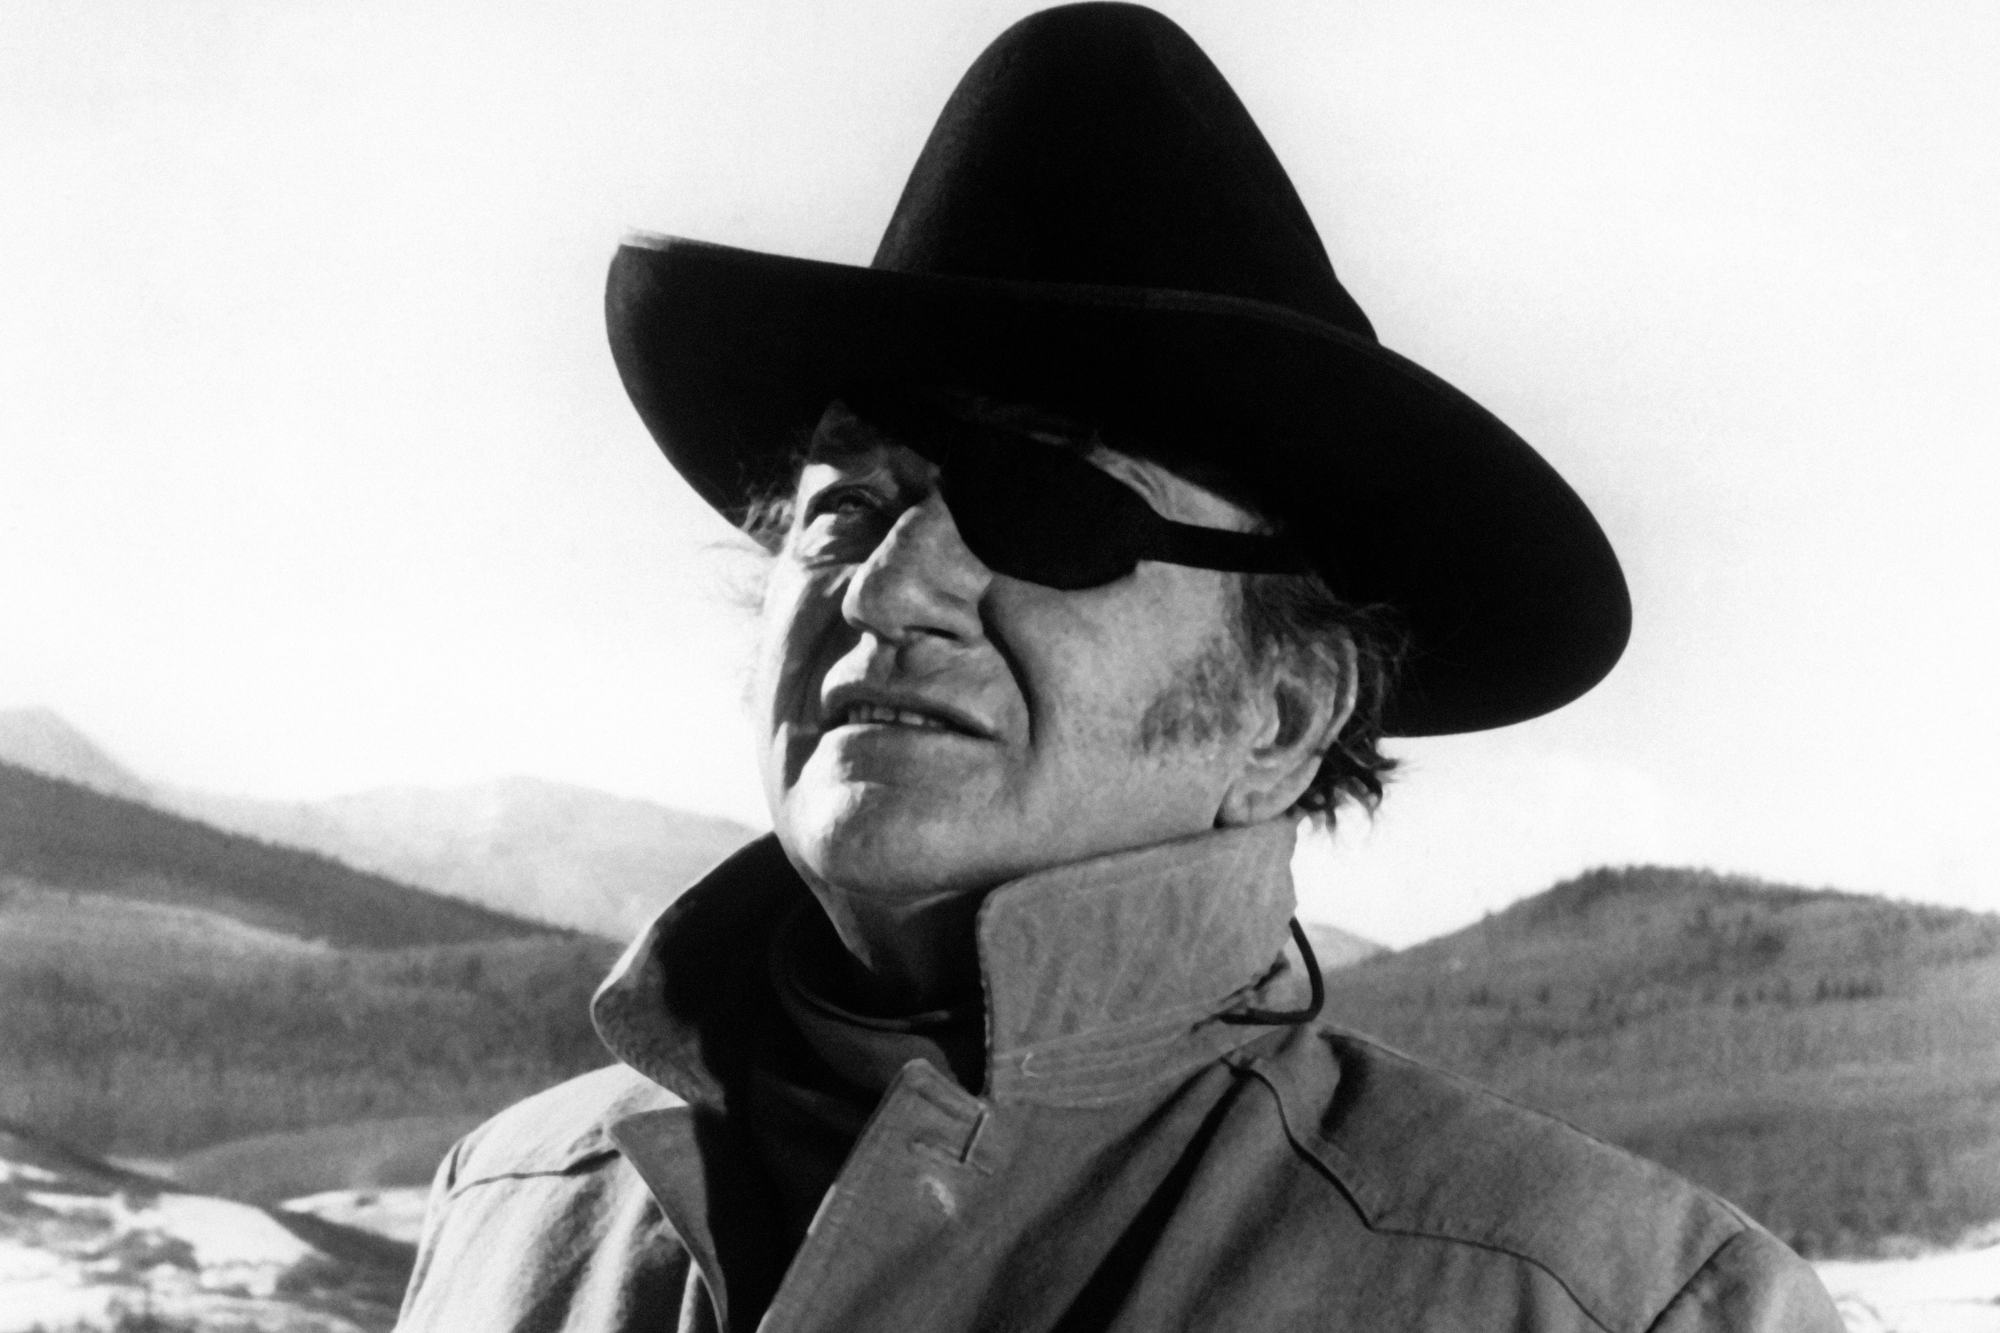 'True Grit' John Wayne as Rooster Cogburn in a black-and-white picture, wearing a cowboy hat and eyepatch.